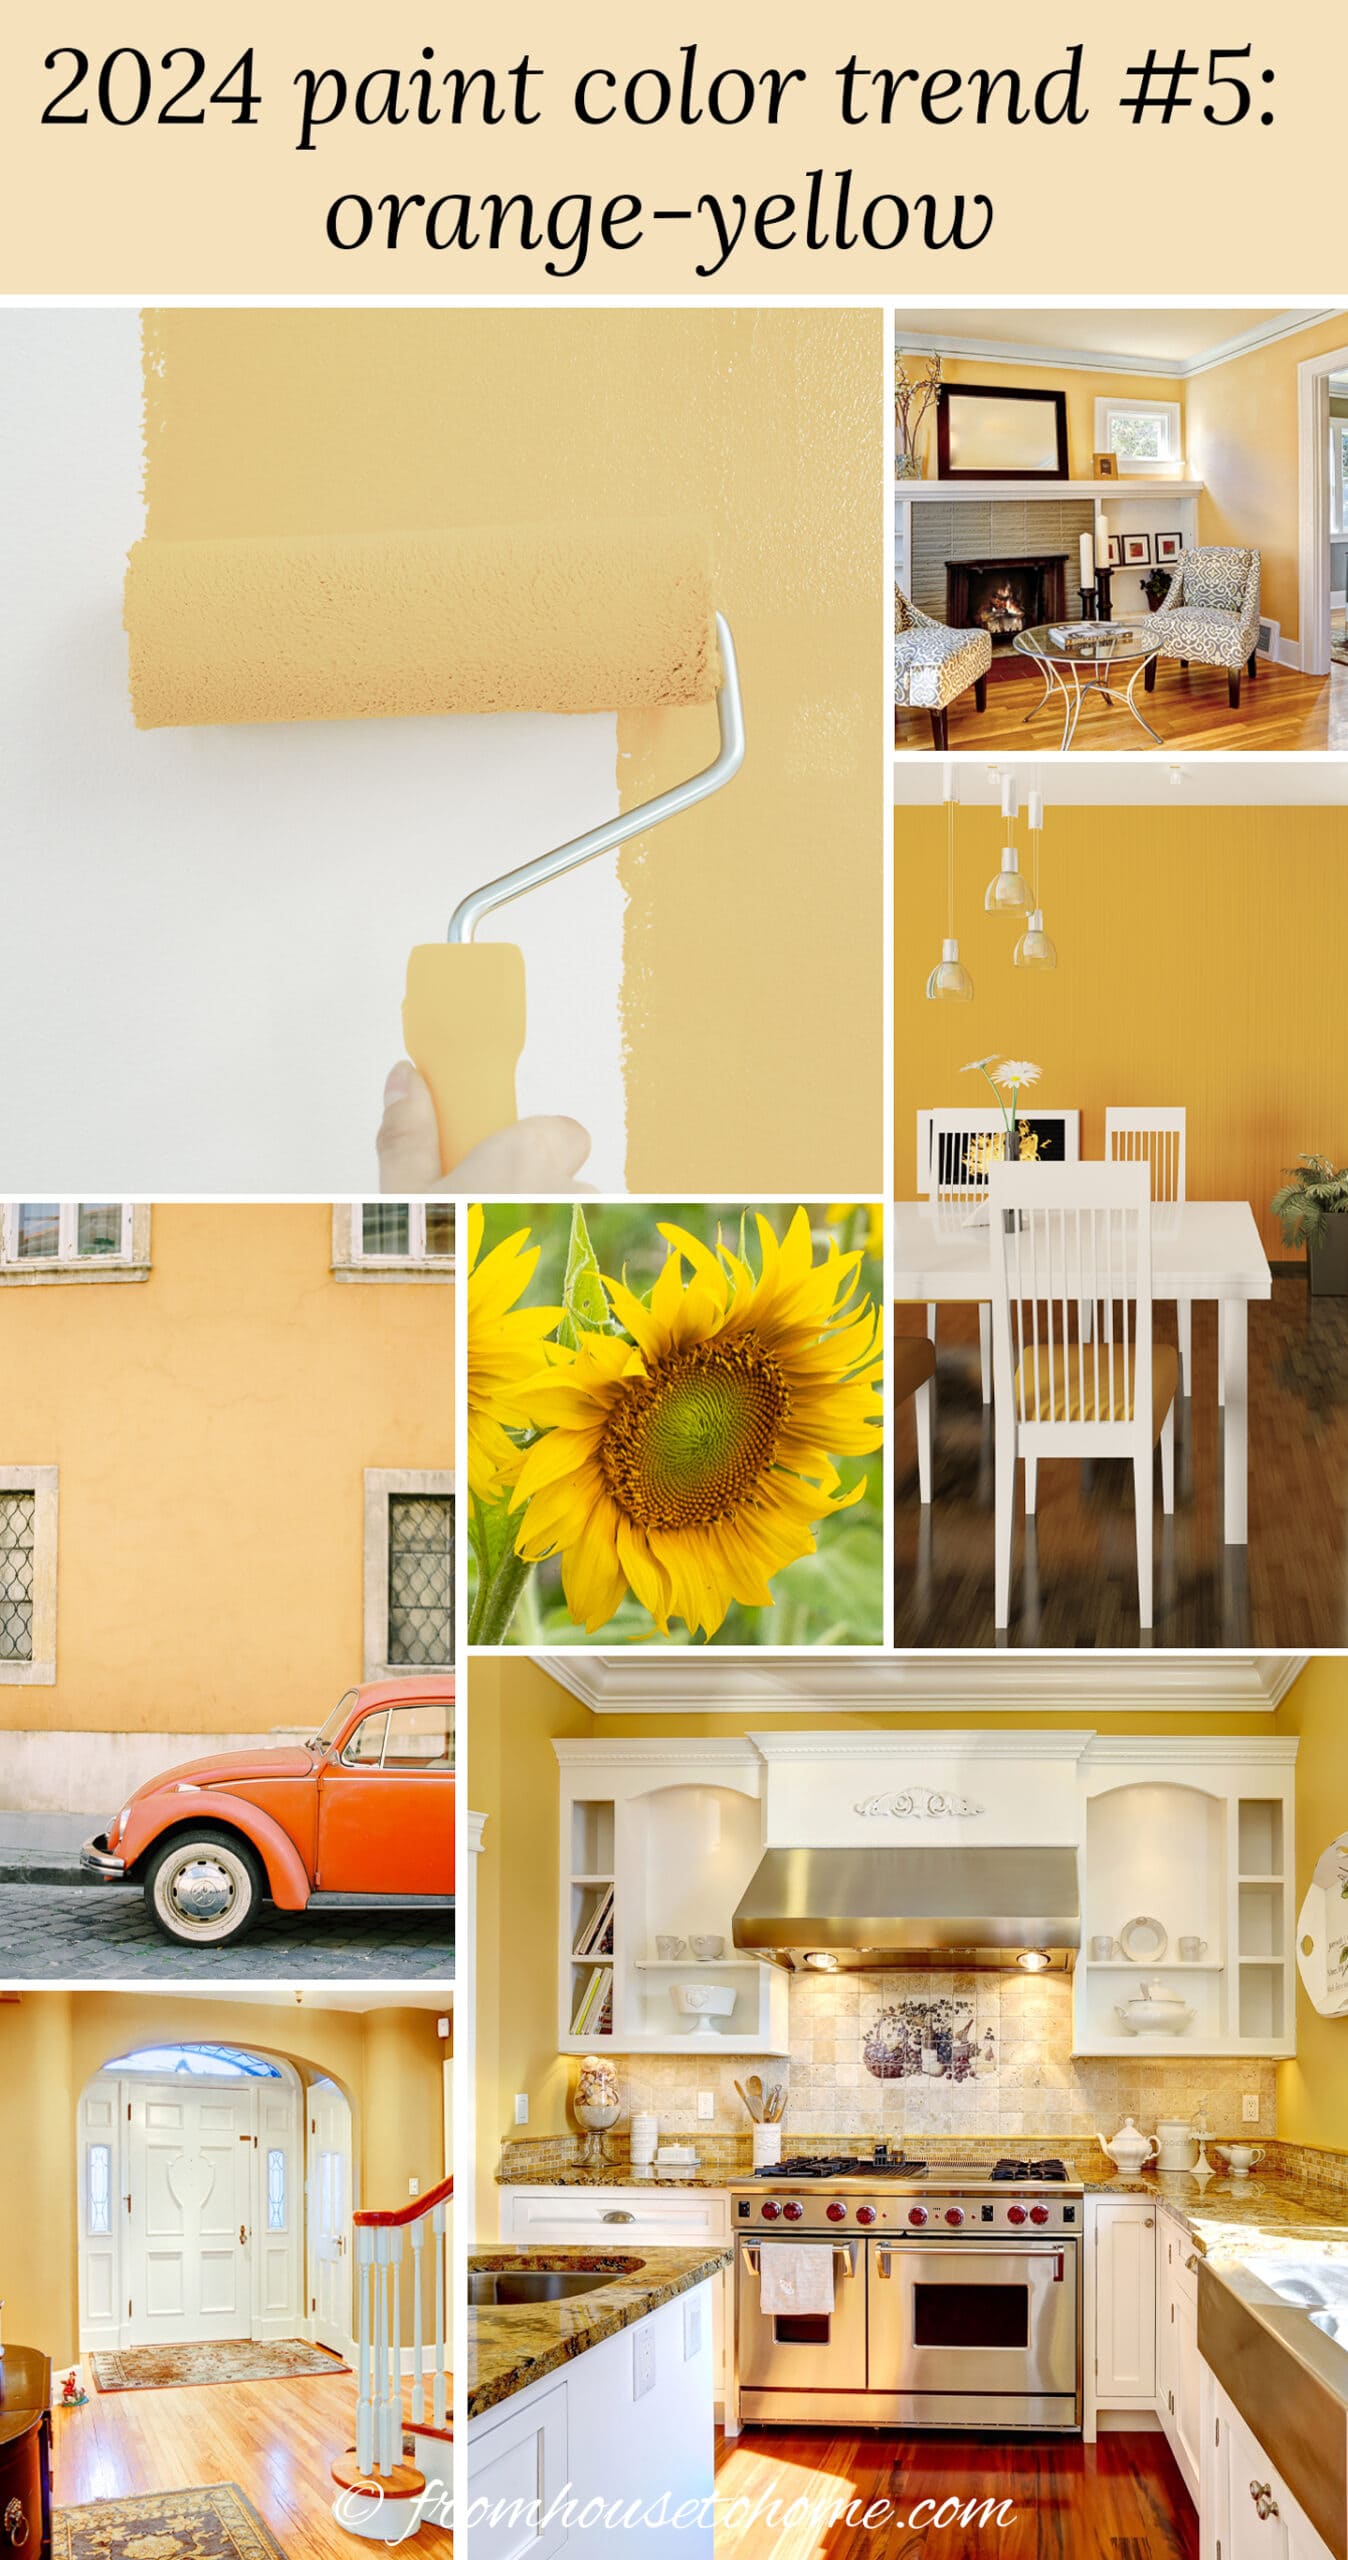 collage of orange-yellow items representing 2024 paint color trends